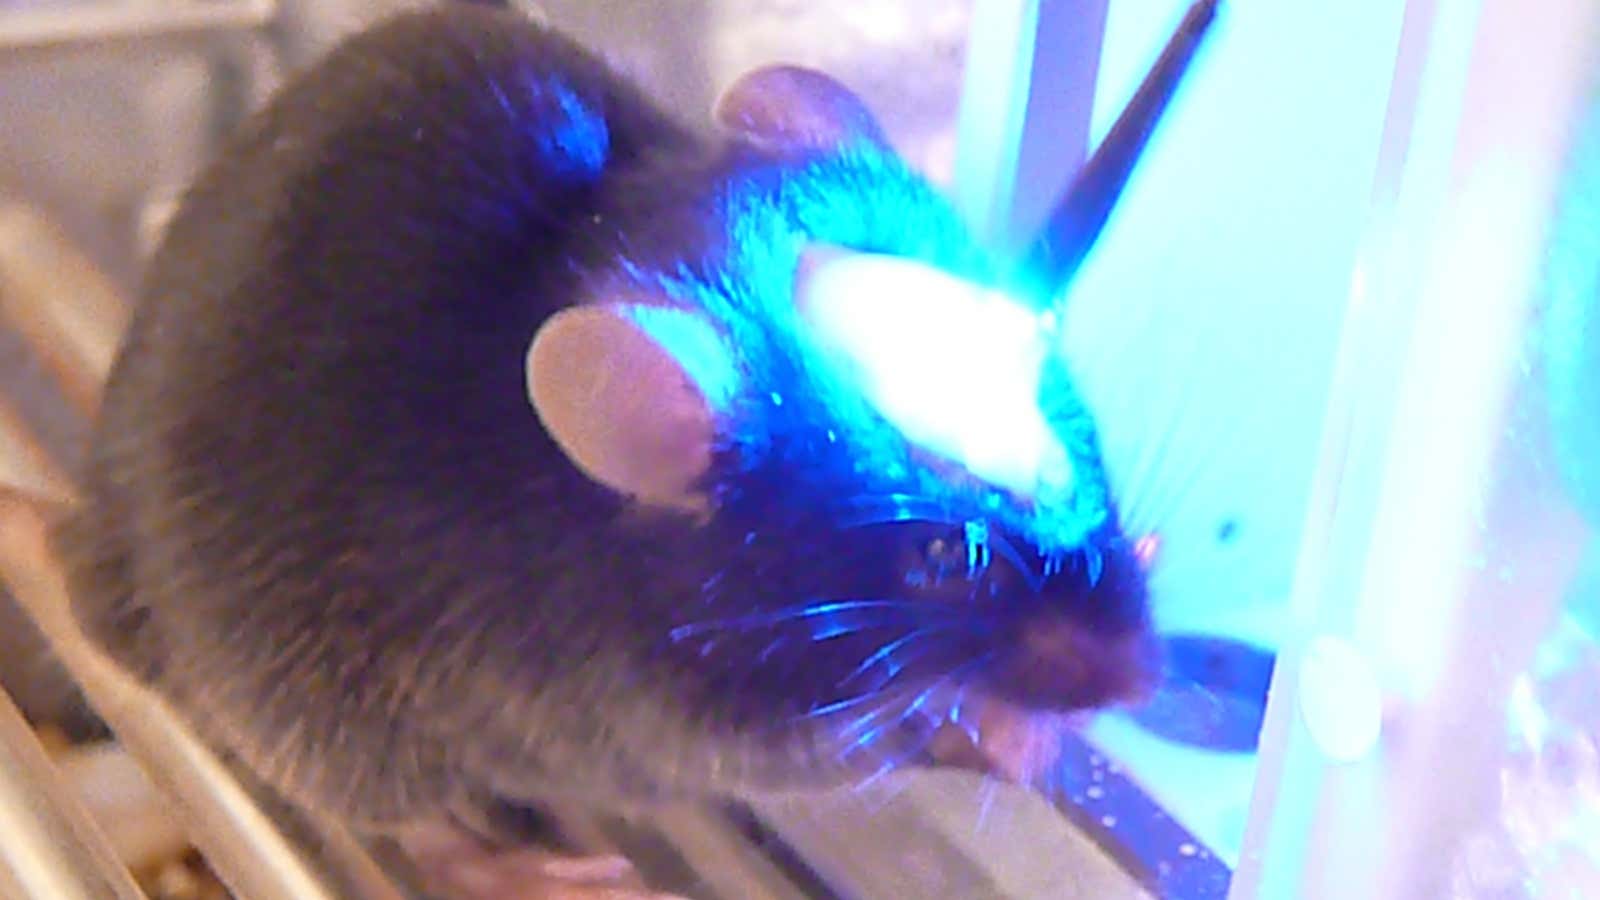 Neurons are triggered in a mouse’s brain using light